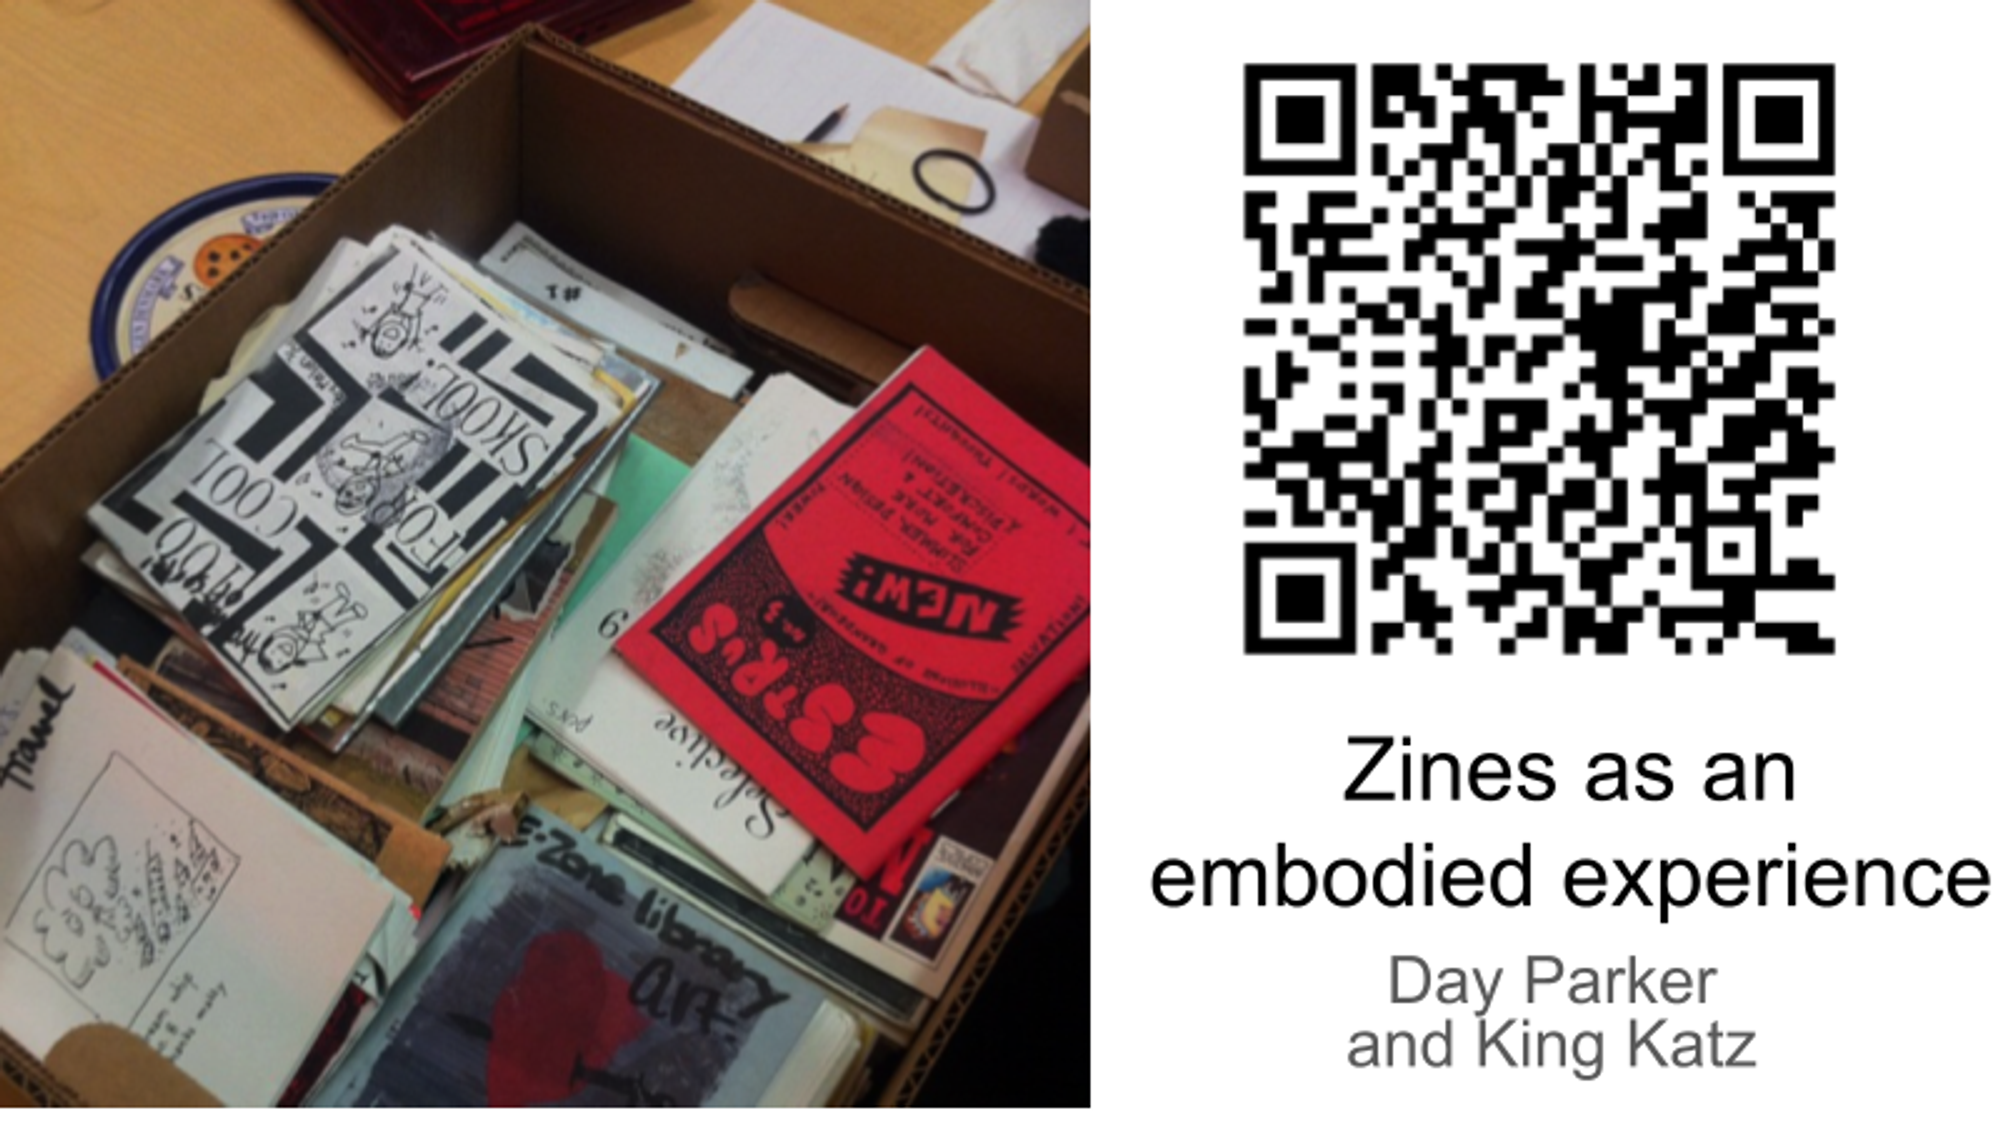 Zines as embodied experience